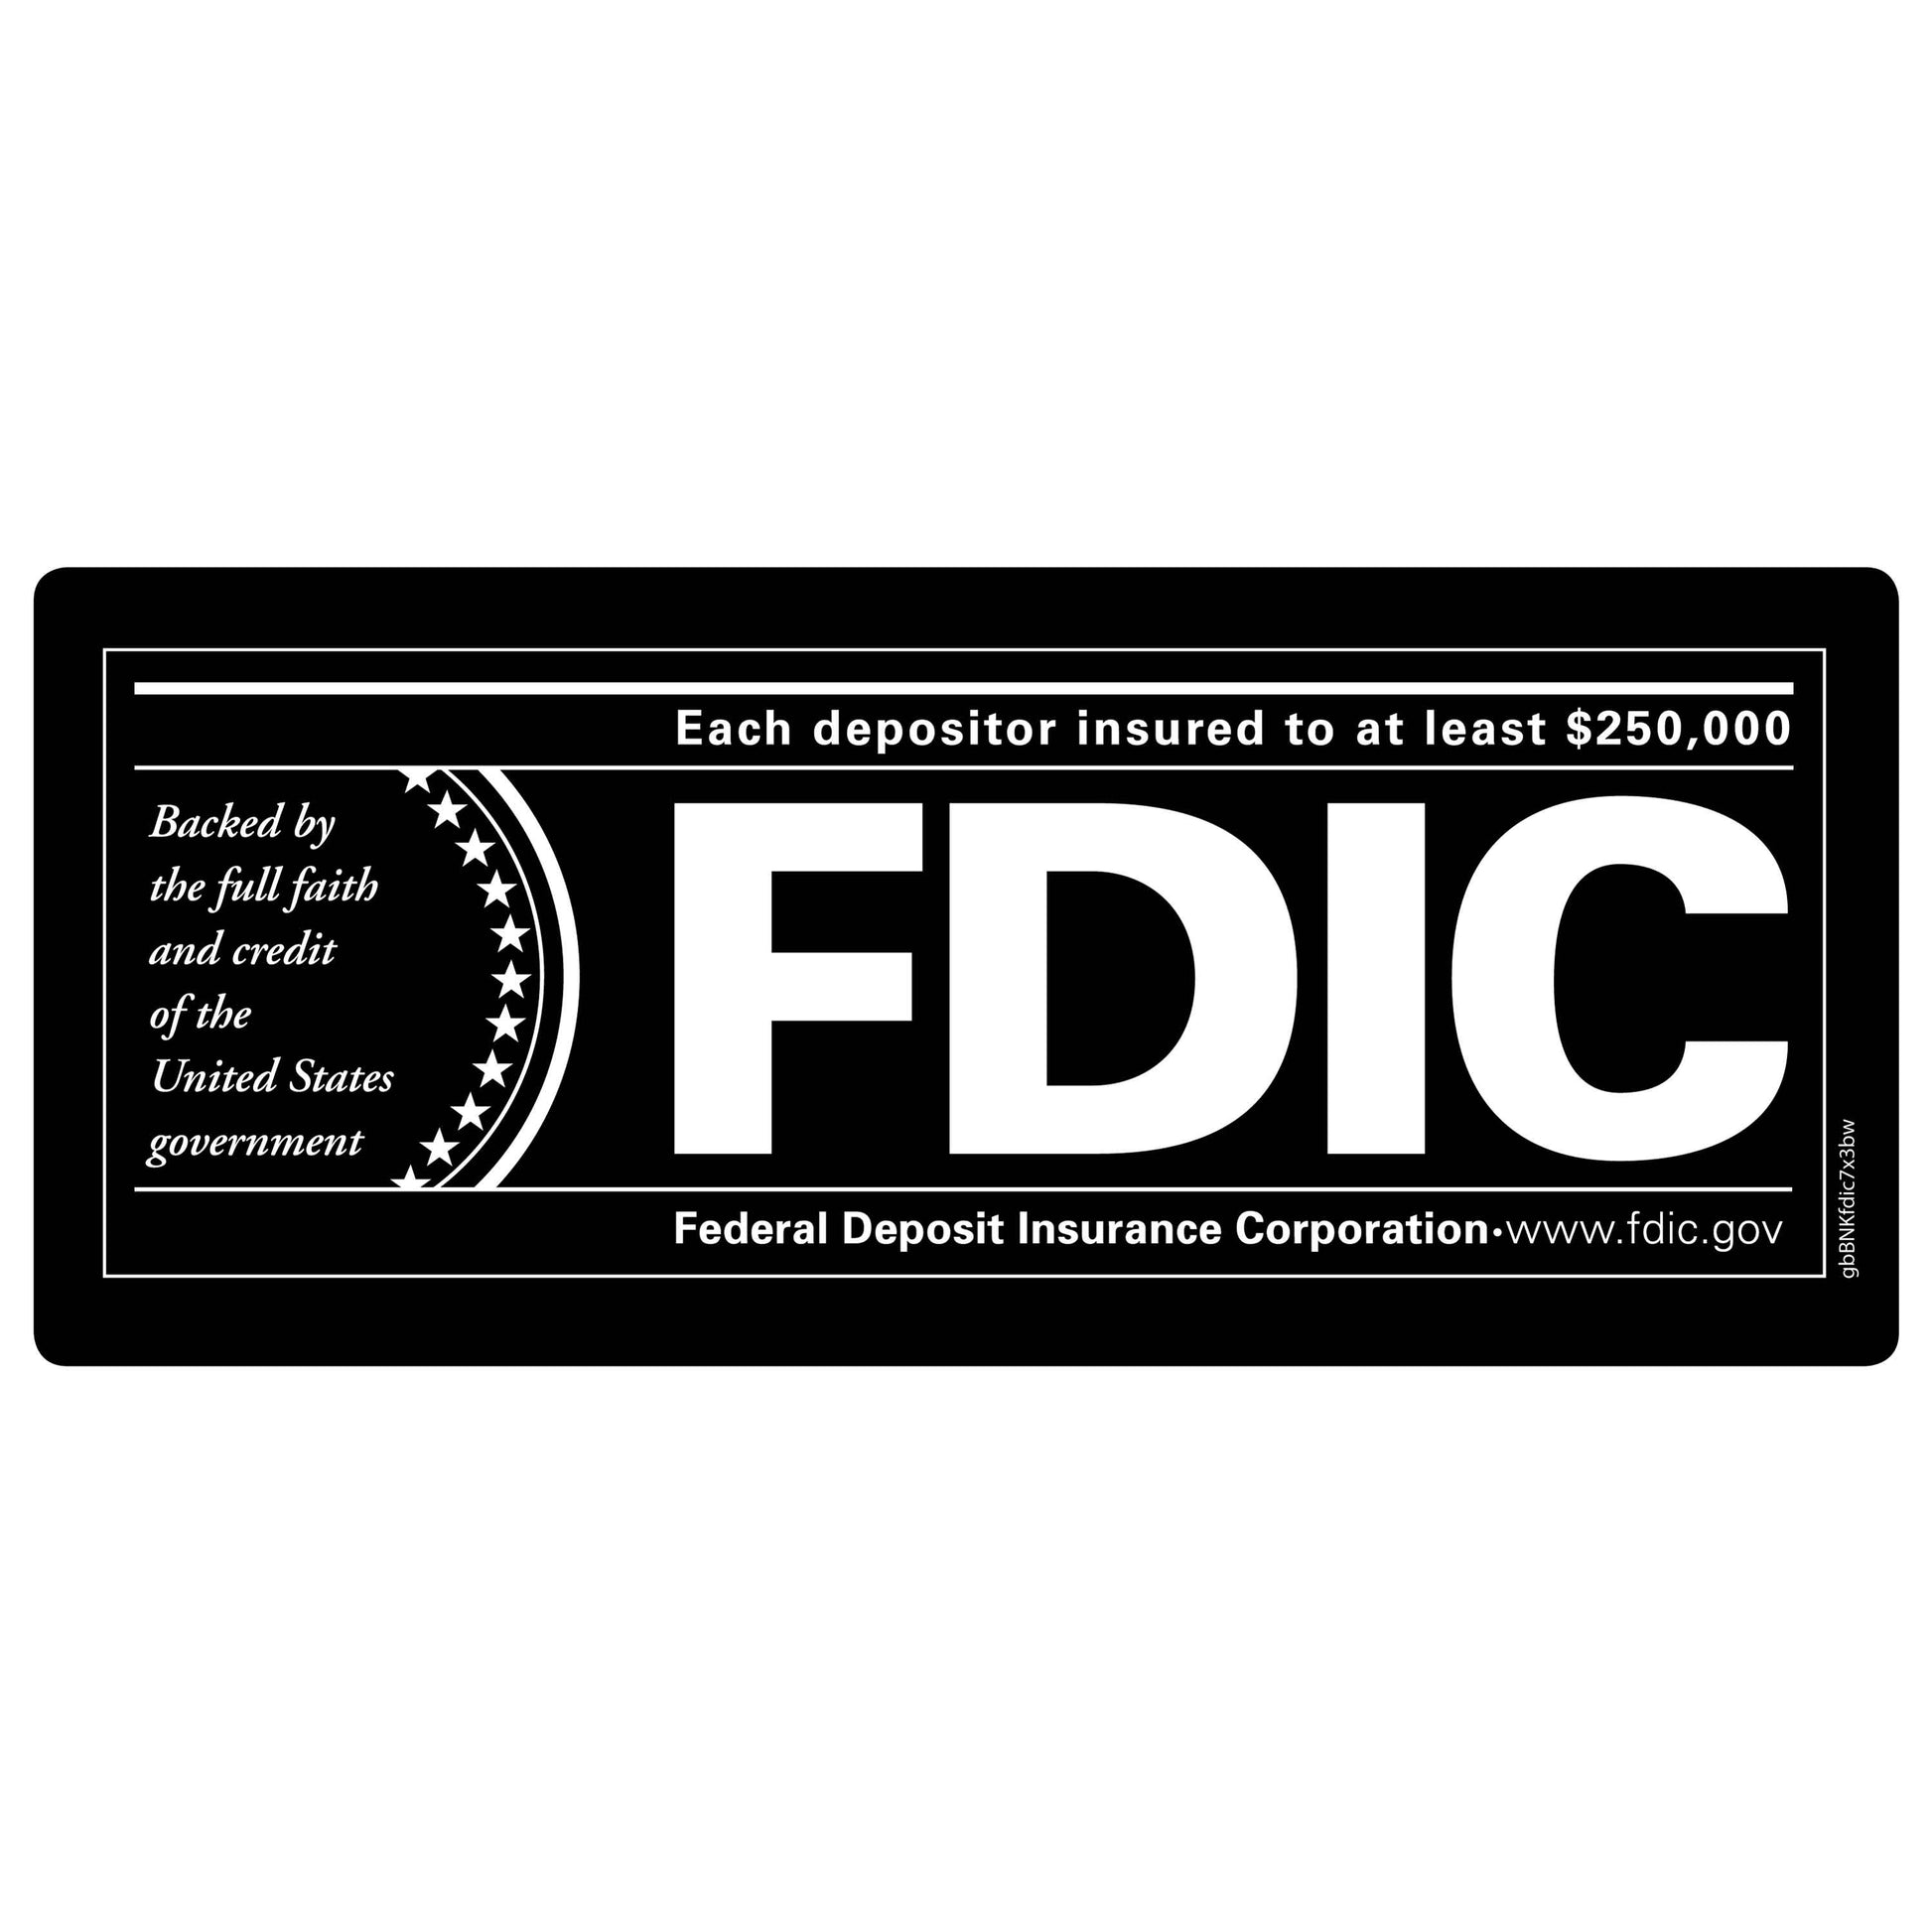 FDIC Black and White Decal. 7 inches by 3 inches in size.